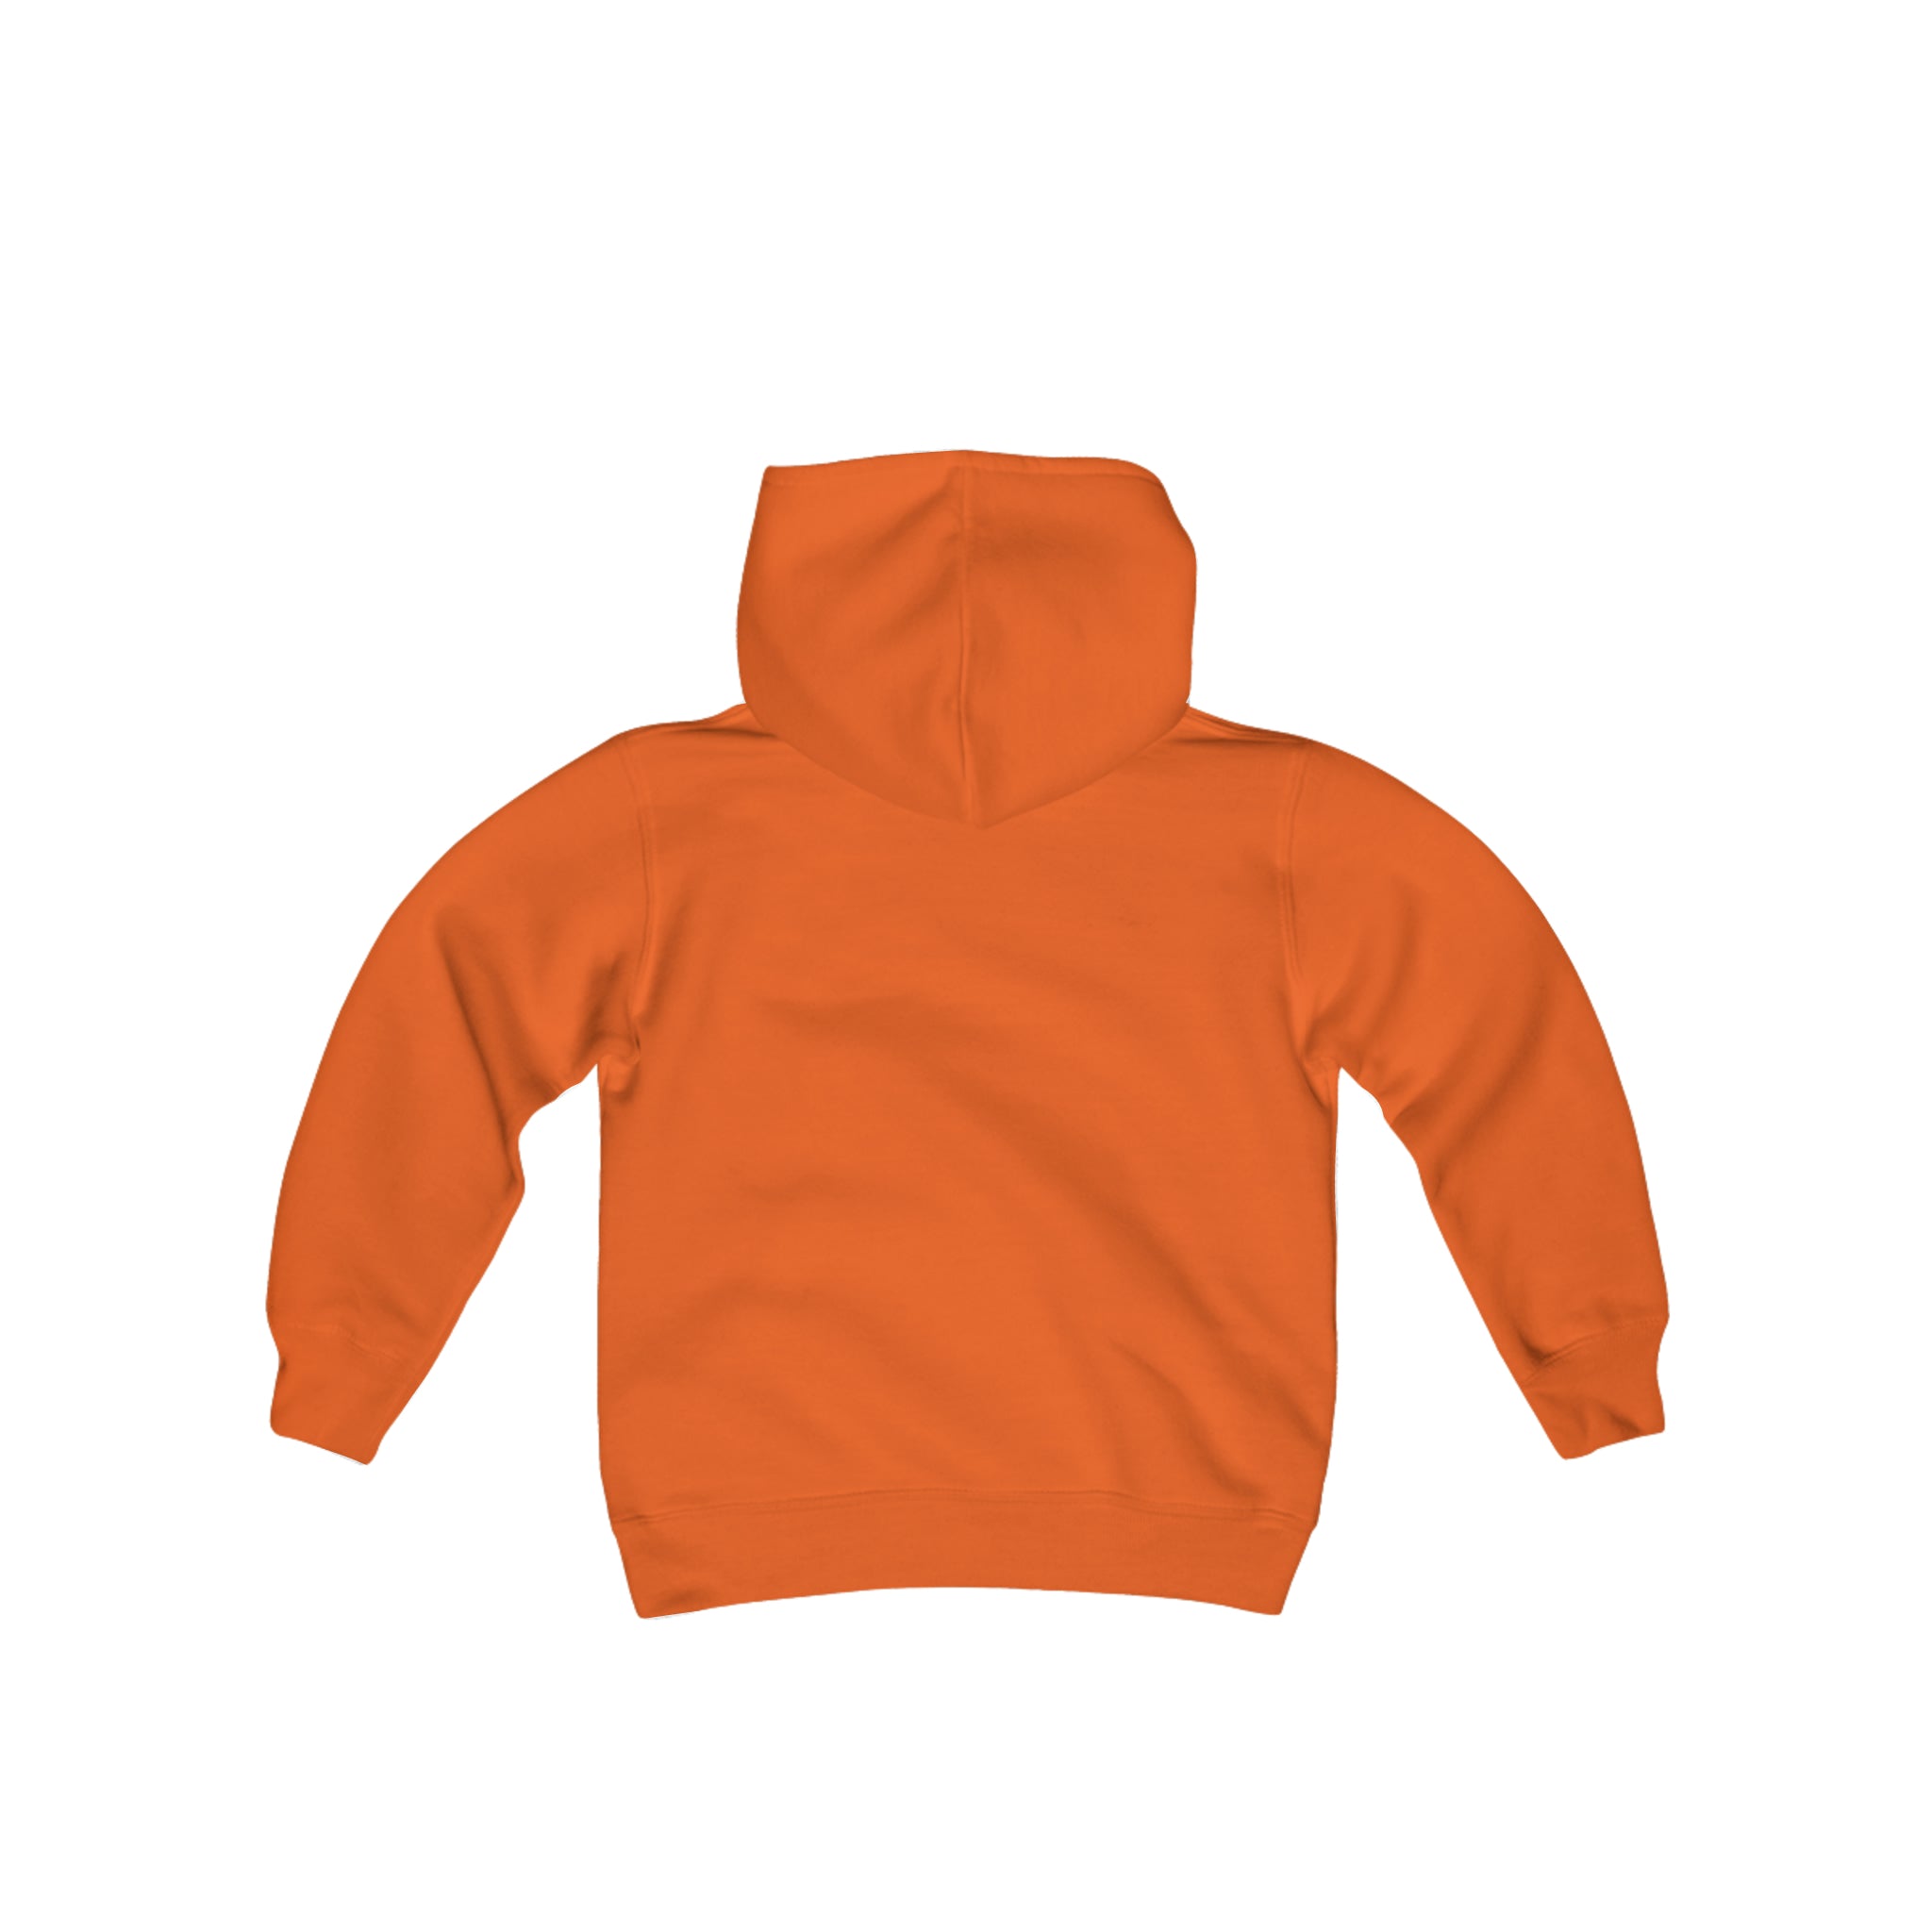 More Than Just A Game - Youth Heavy Blend Hooded Sweatshirt